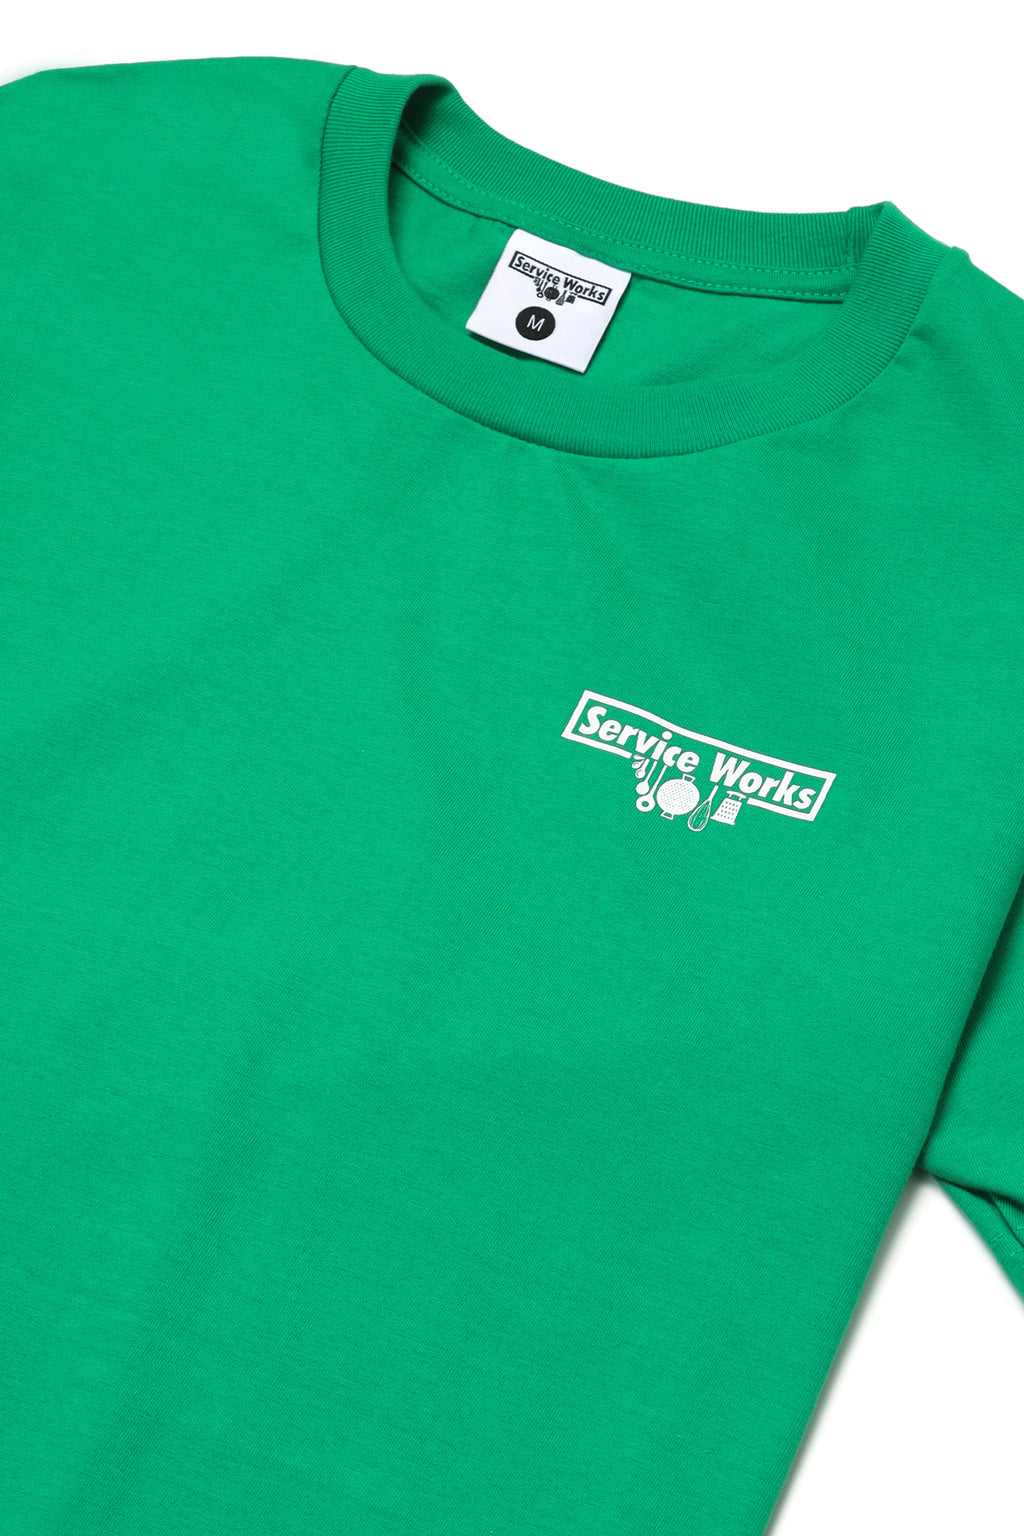 Service Works - Logo Tee - Bright Forest